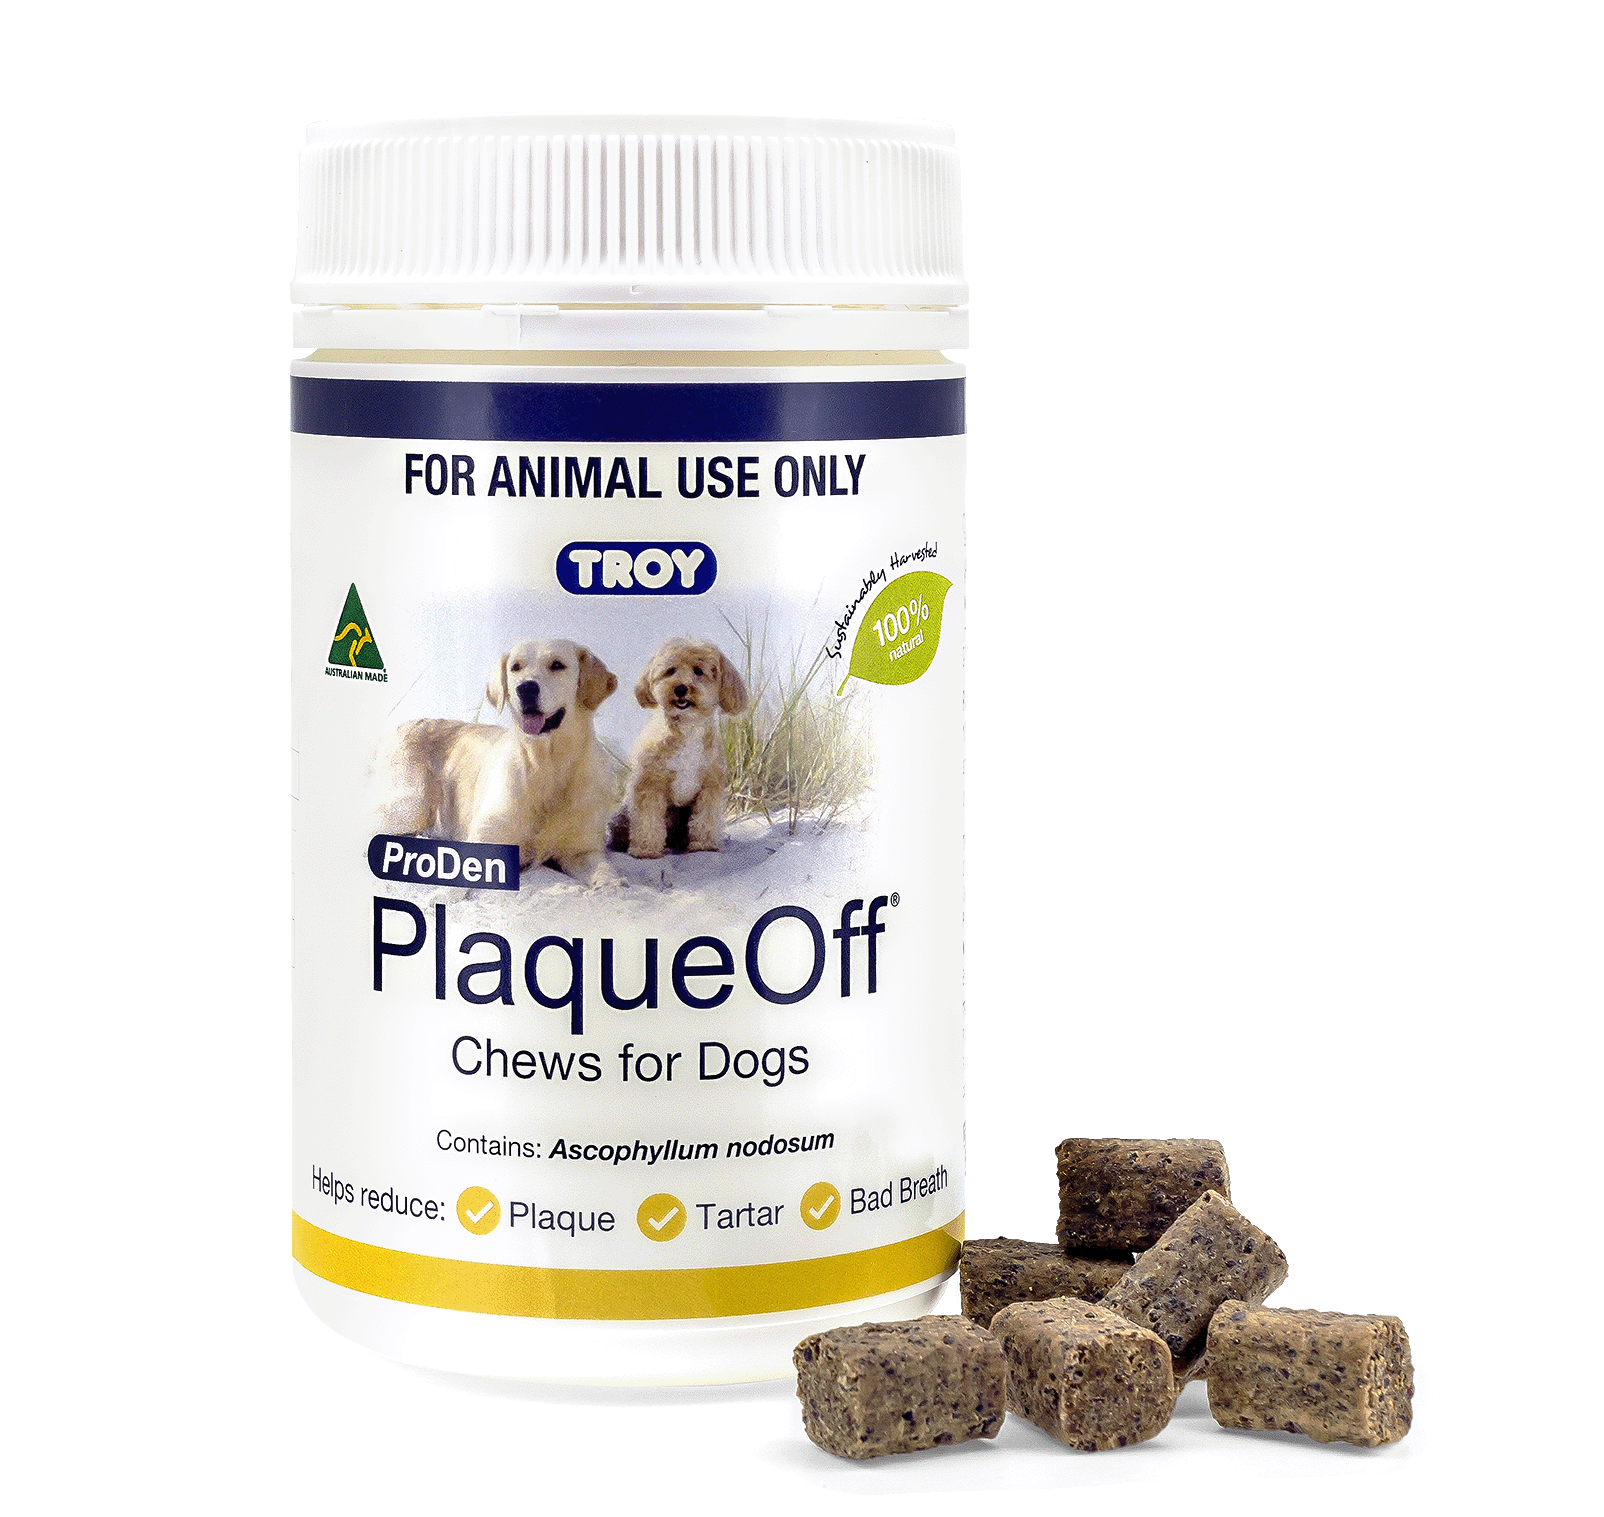 A pack of PlaqueOff Chews for Dogs, with a small pile of the chews next to it.